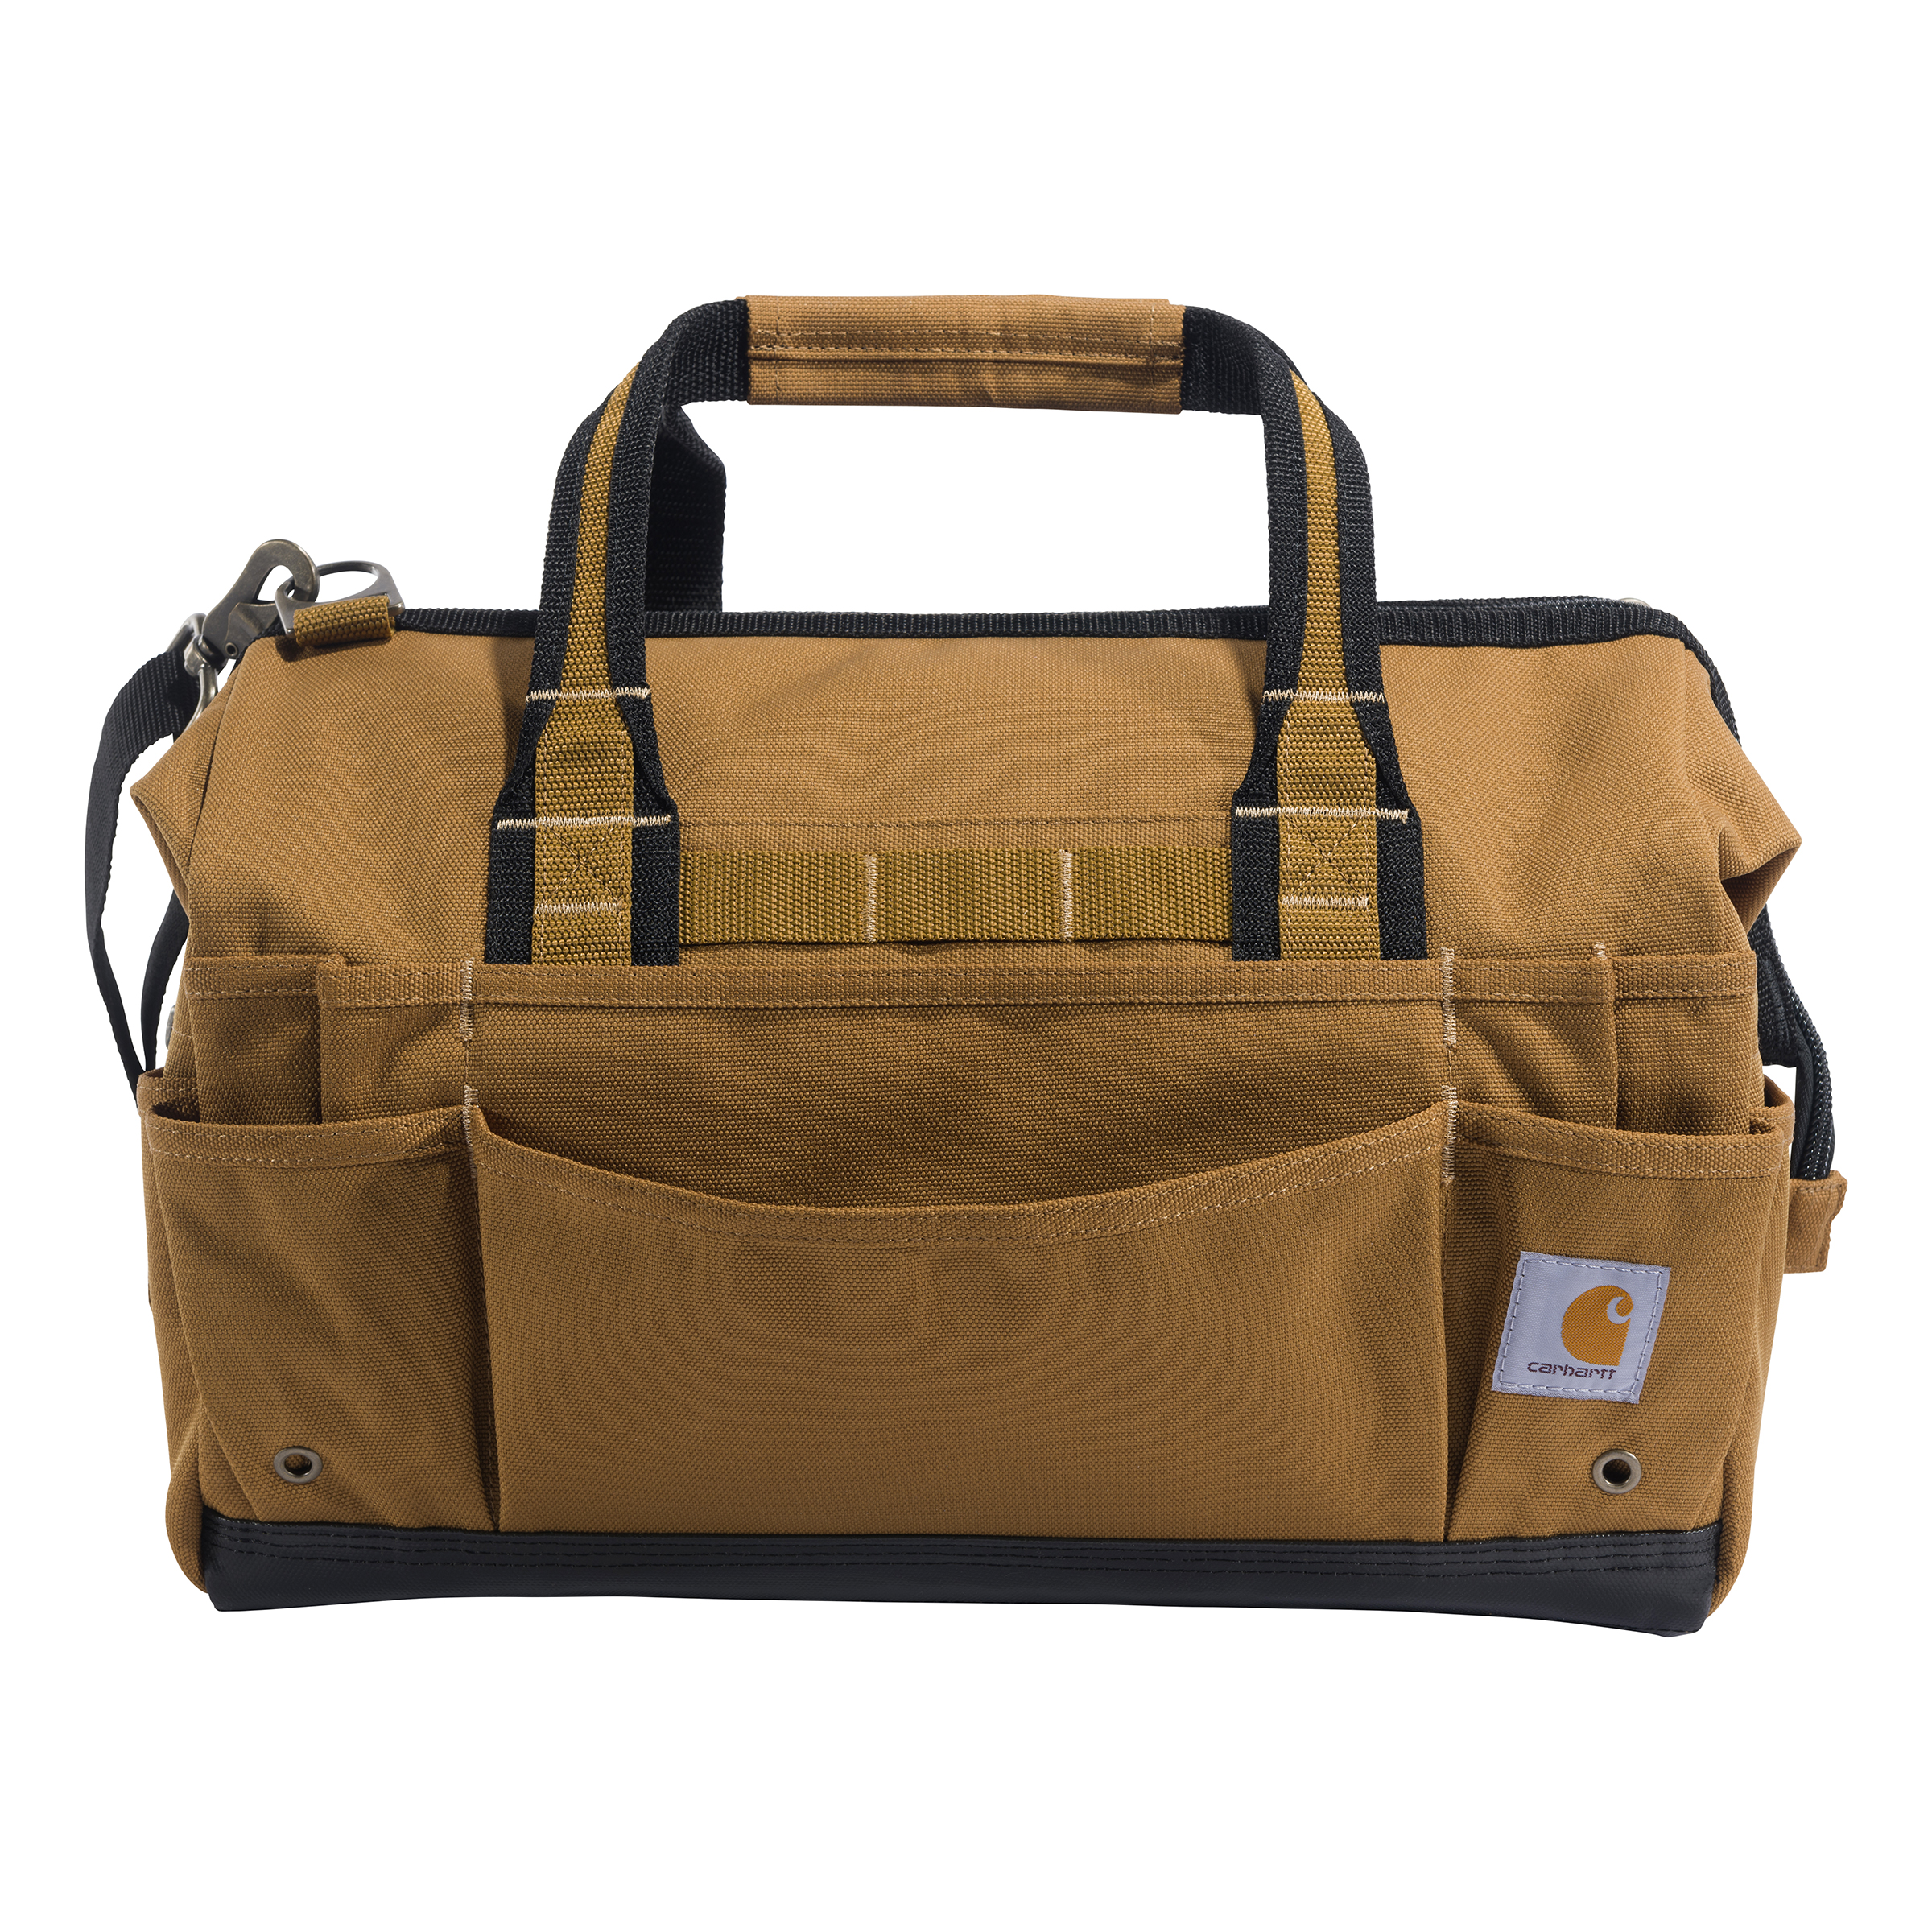 Picture of Carhartt B0000352 Mens 16-Inch 30 Pocket Heavyweight Tool Bag